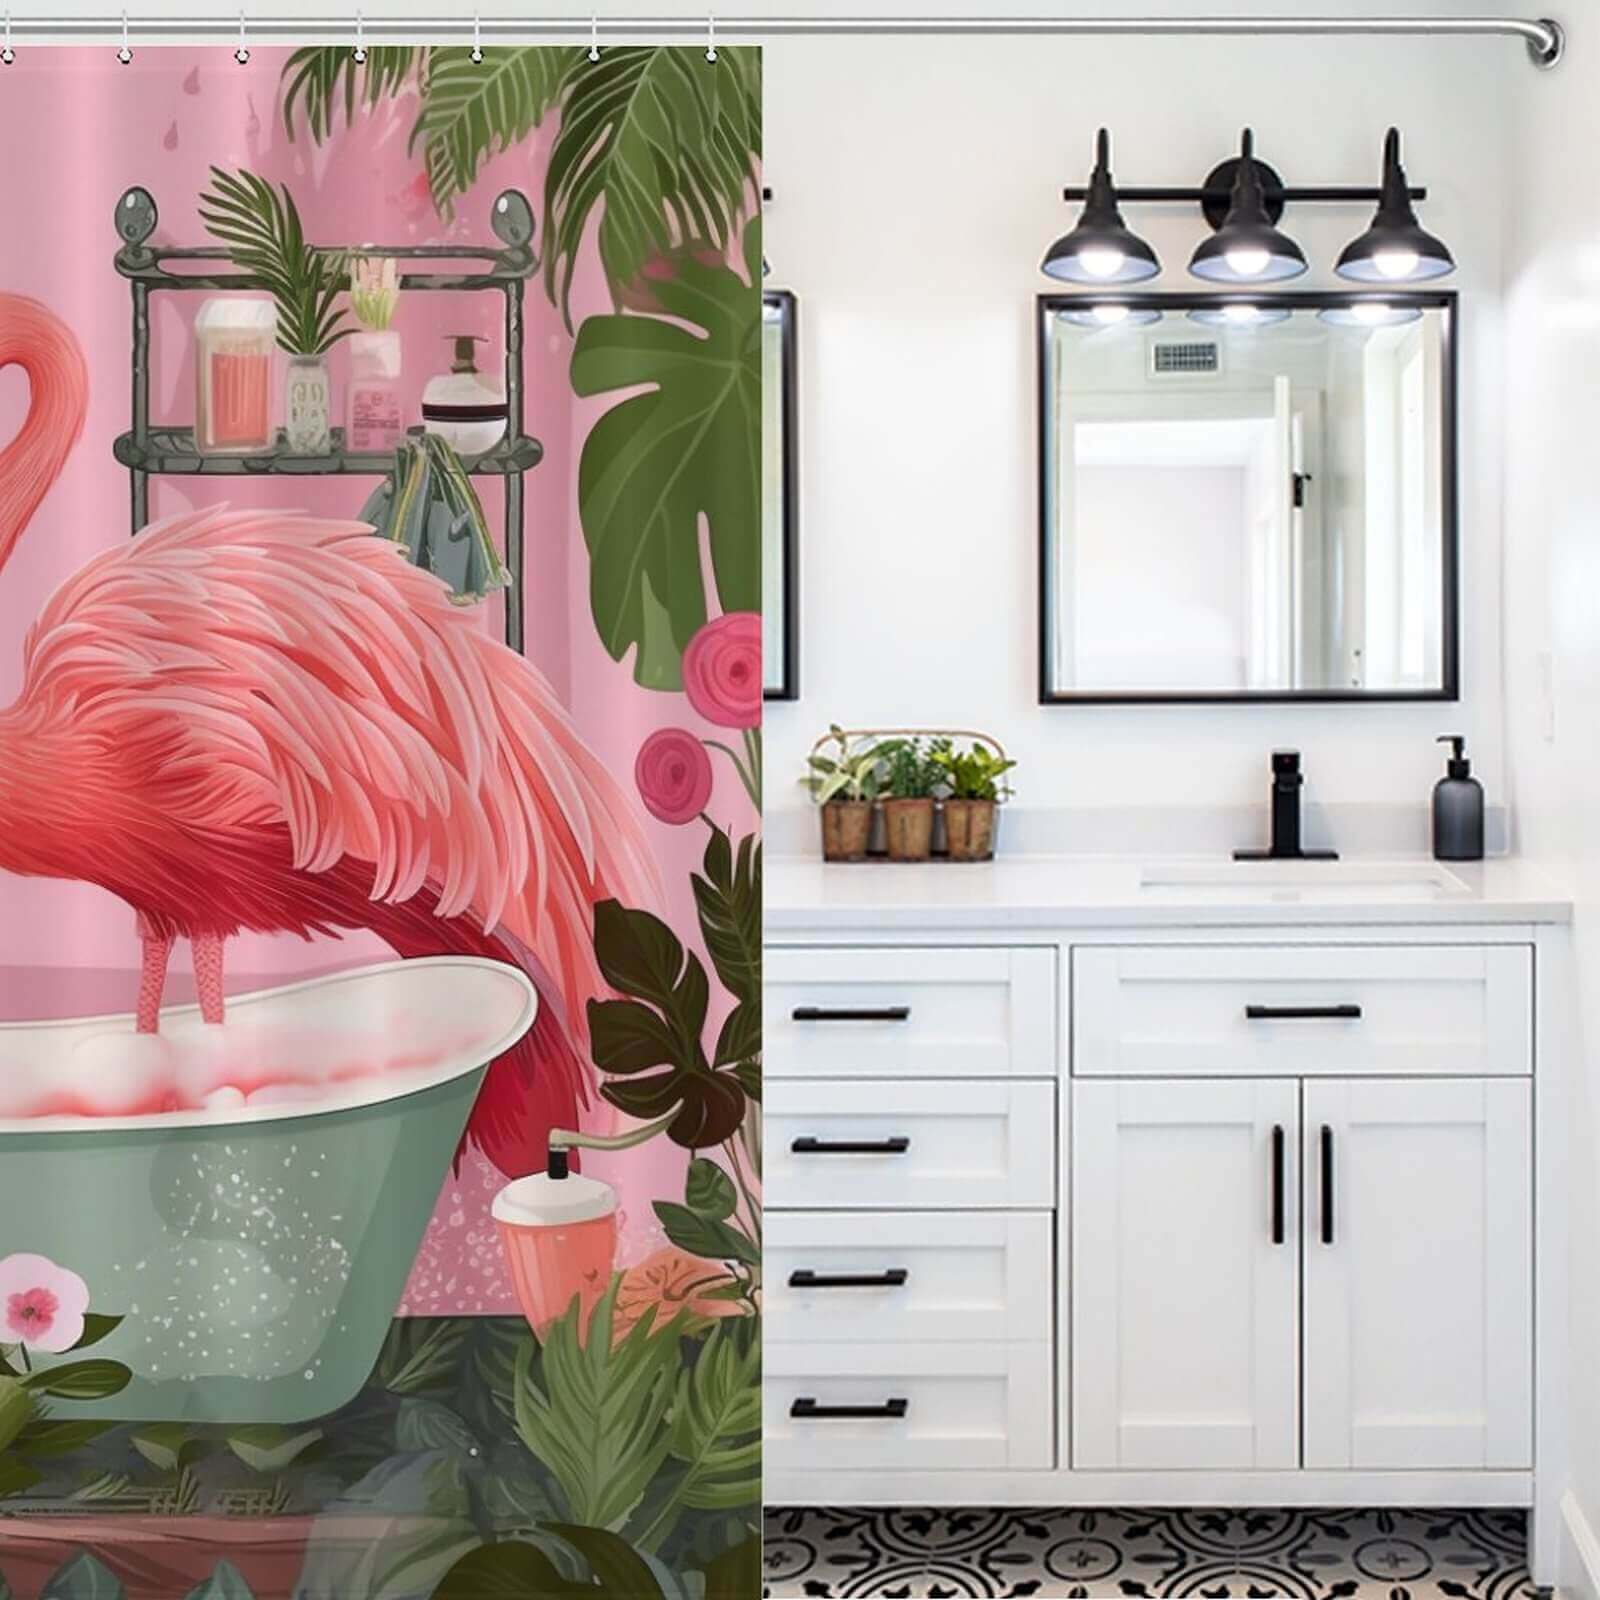 Boho Tropical Flamingo Shower Curtain by Cotton Cat, featuring a vibrant pink flamingo design, perfect for adding a pop of color to your bathroom.